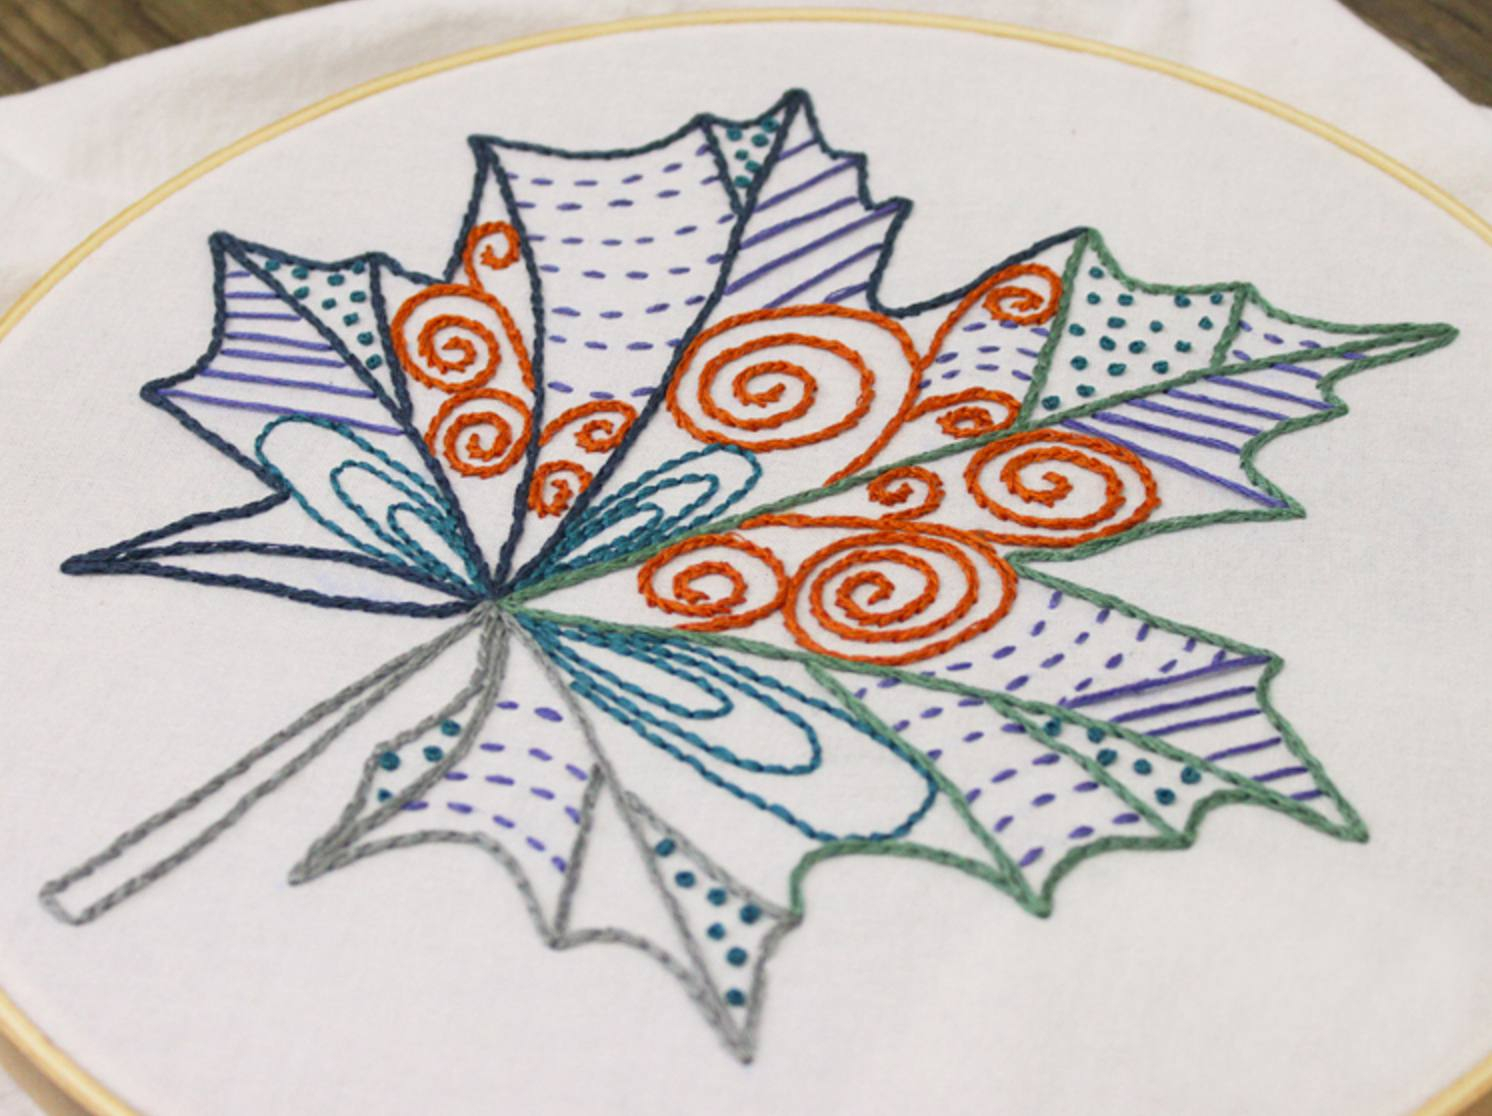 Paper Embroidery Patterns Free 10 Hand Embroidery Patterns For Autumn Stitching